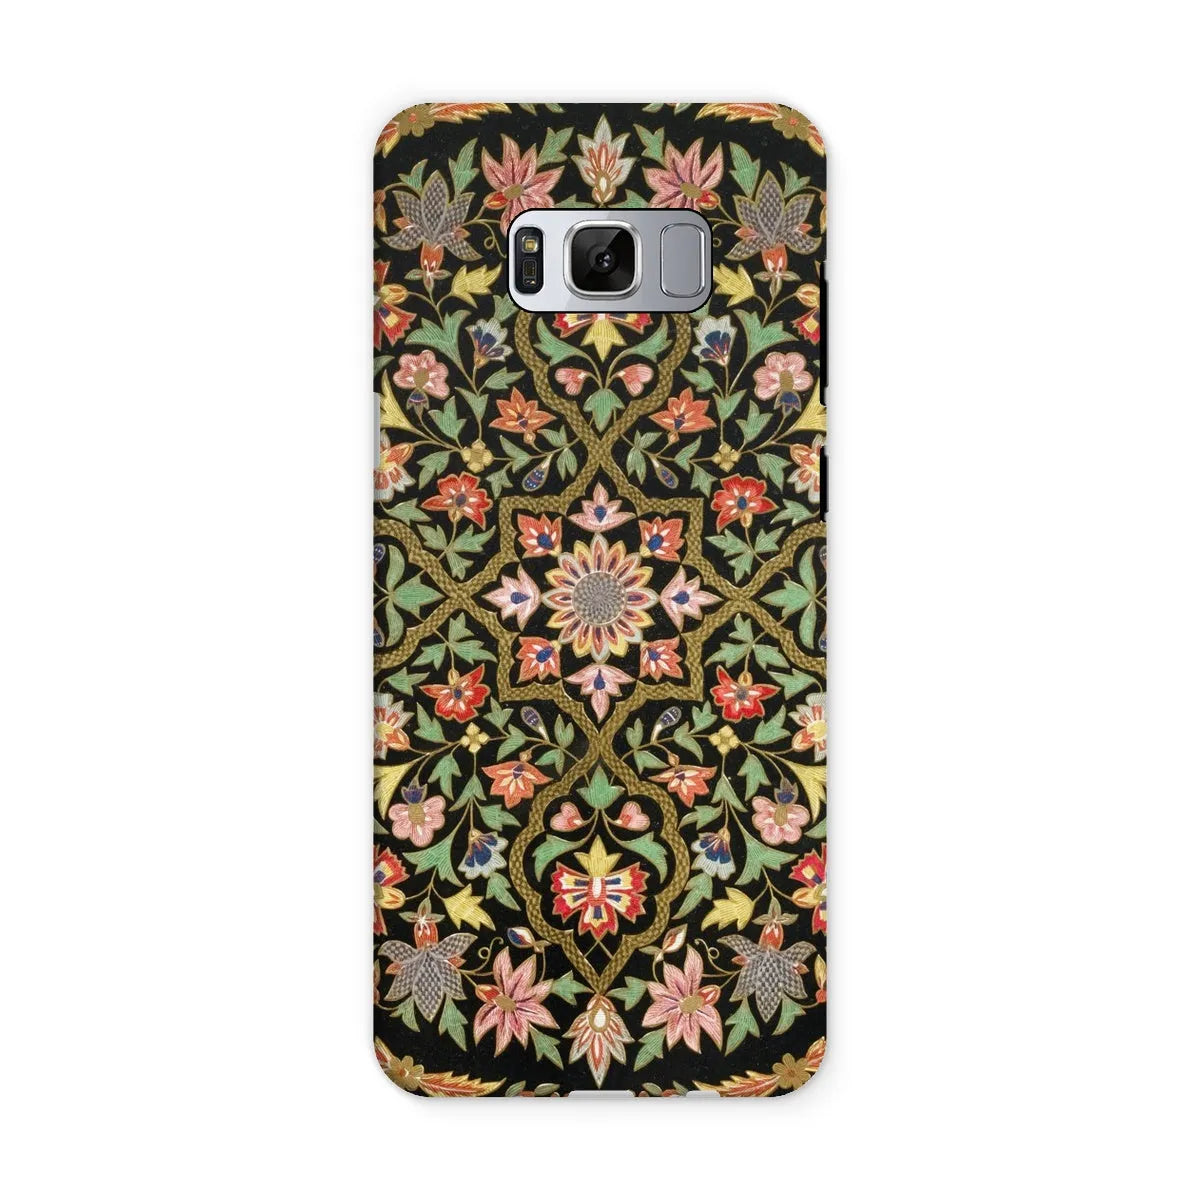 Indian Embroidery - Aesthetic Pattern Art Phone Case - Samsung Galaxy S8 / Matte - Mobile Phone Cases - Aesthetic Art